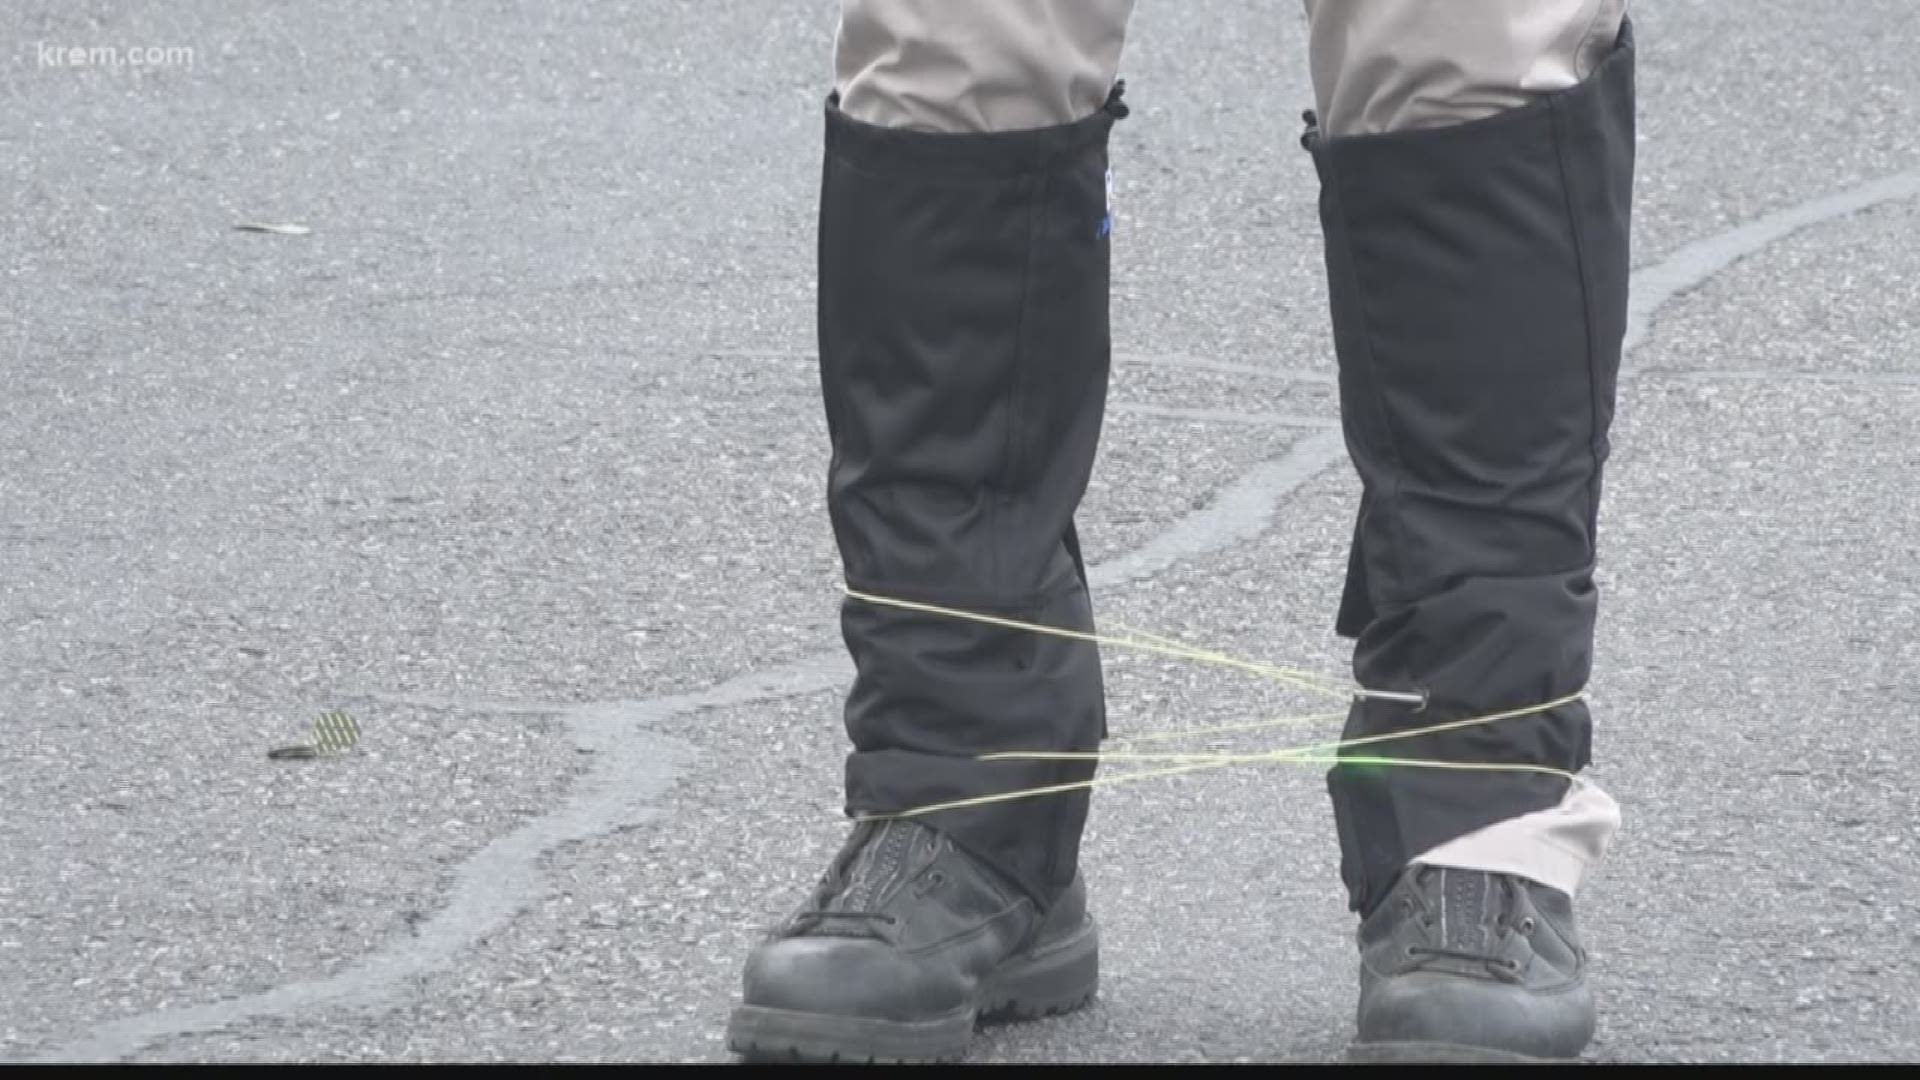 The device launches a 7-foot cord with an anchor on each end. The cord wraps around a person’s body and attaches to their clothes, making it difficult to move.